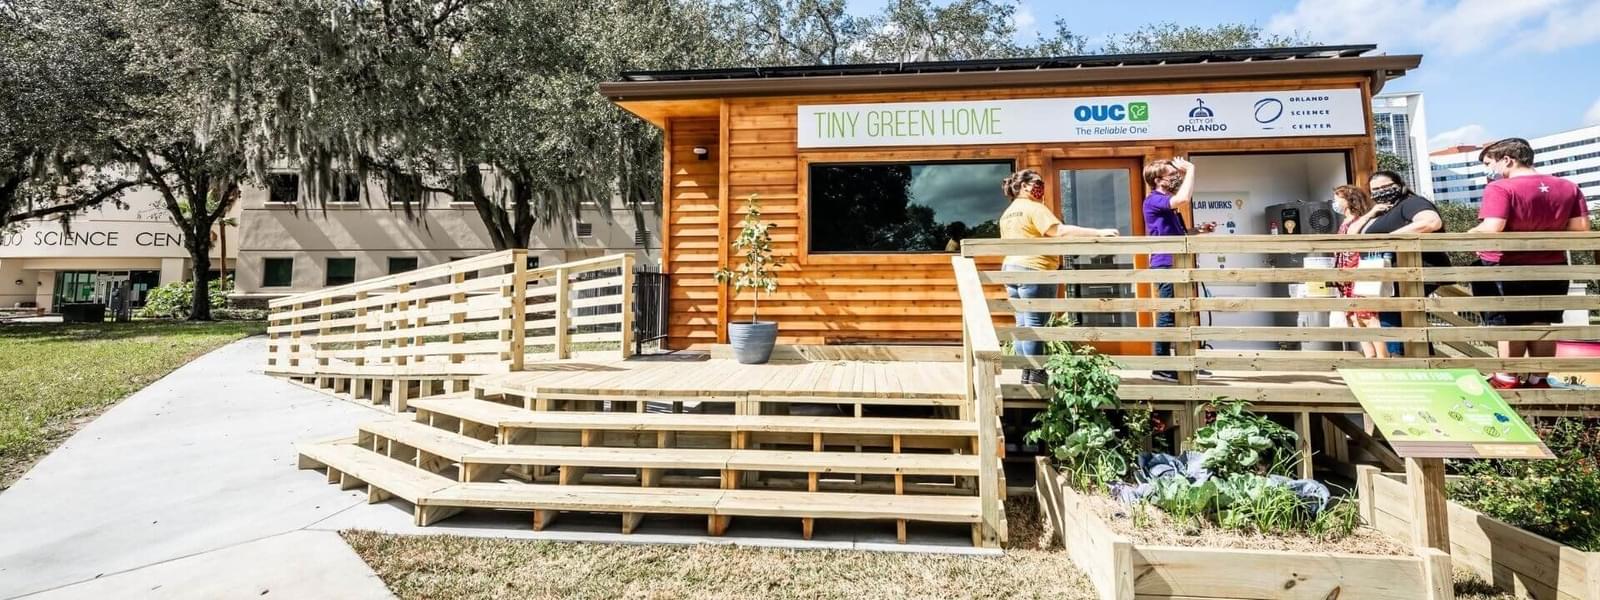 See the Tiny Green Home